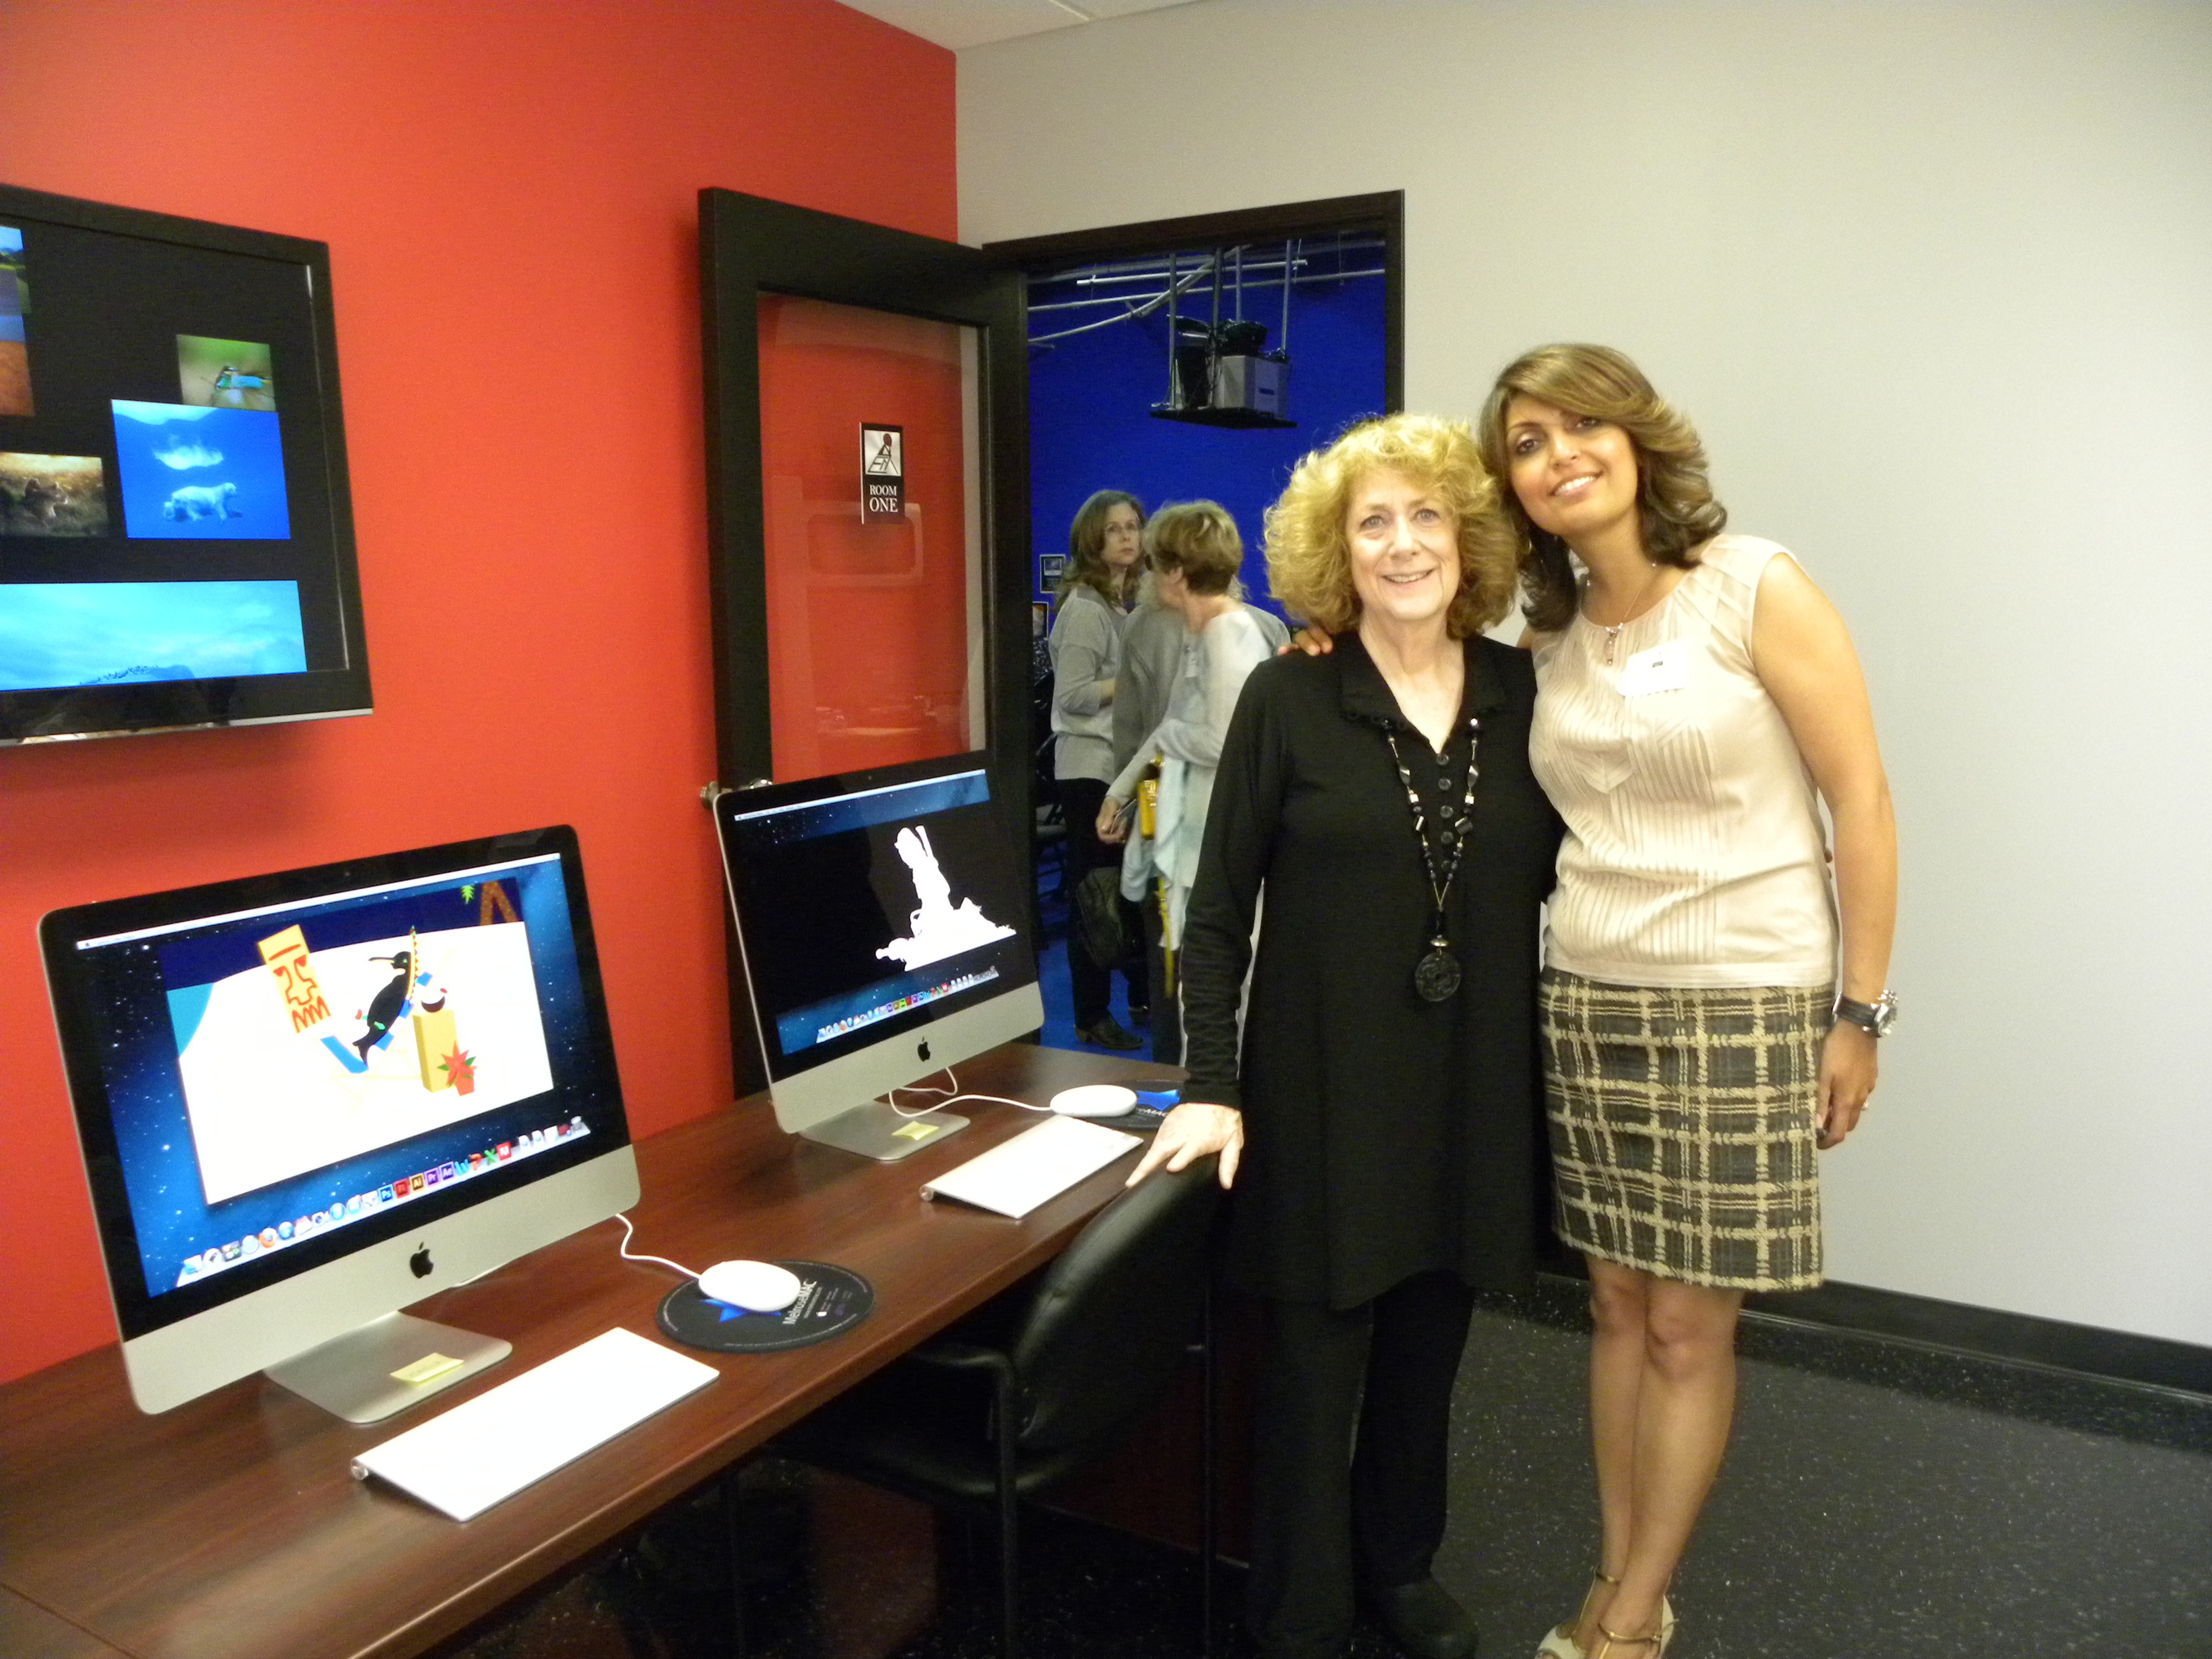 Susan Zwerman, Exceptional Minds Vice Chairperson and Sandy Nasseri, MelroseMAC Founder and President